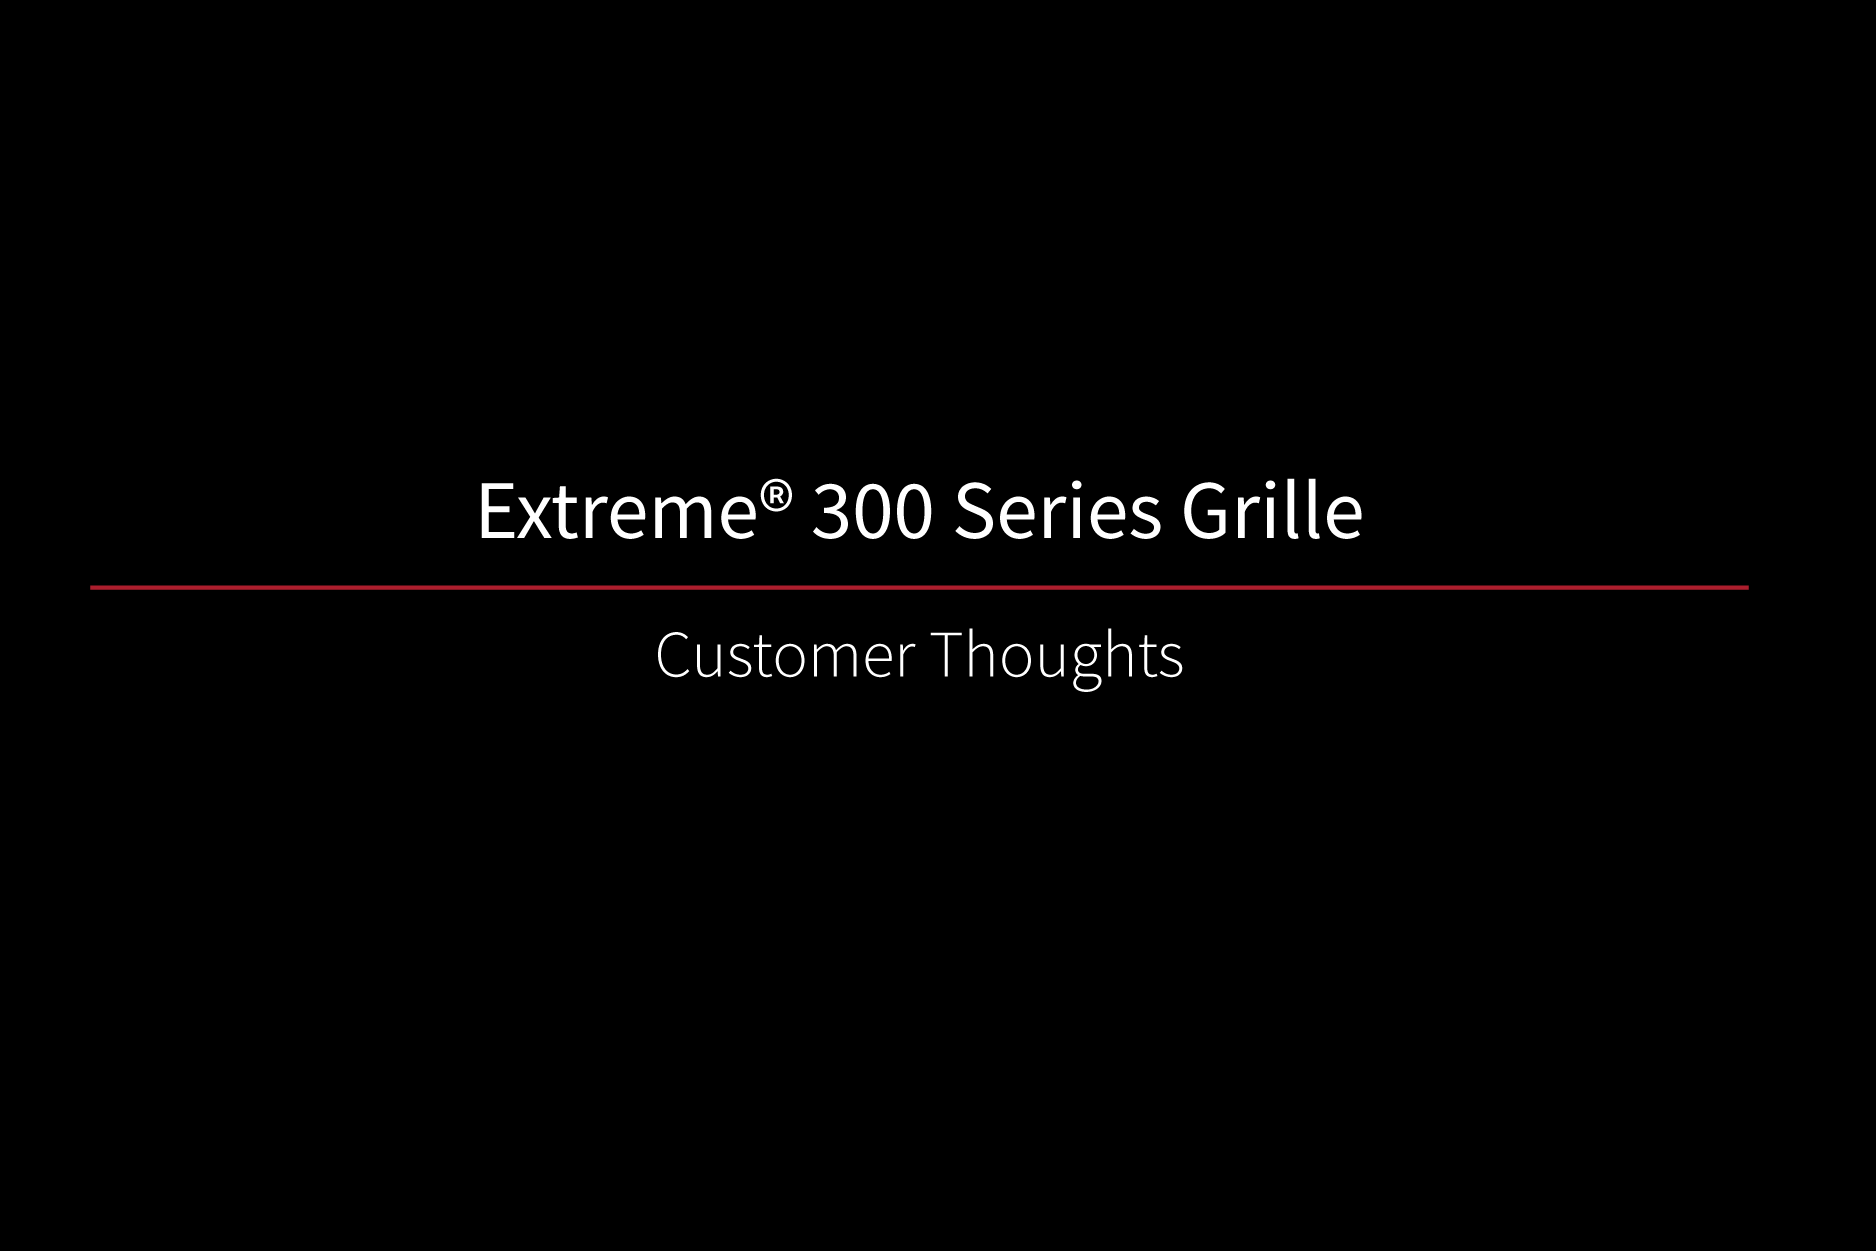 Extreme 300 Series Grille Customer Thoughts